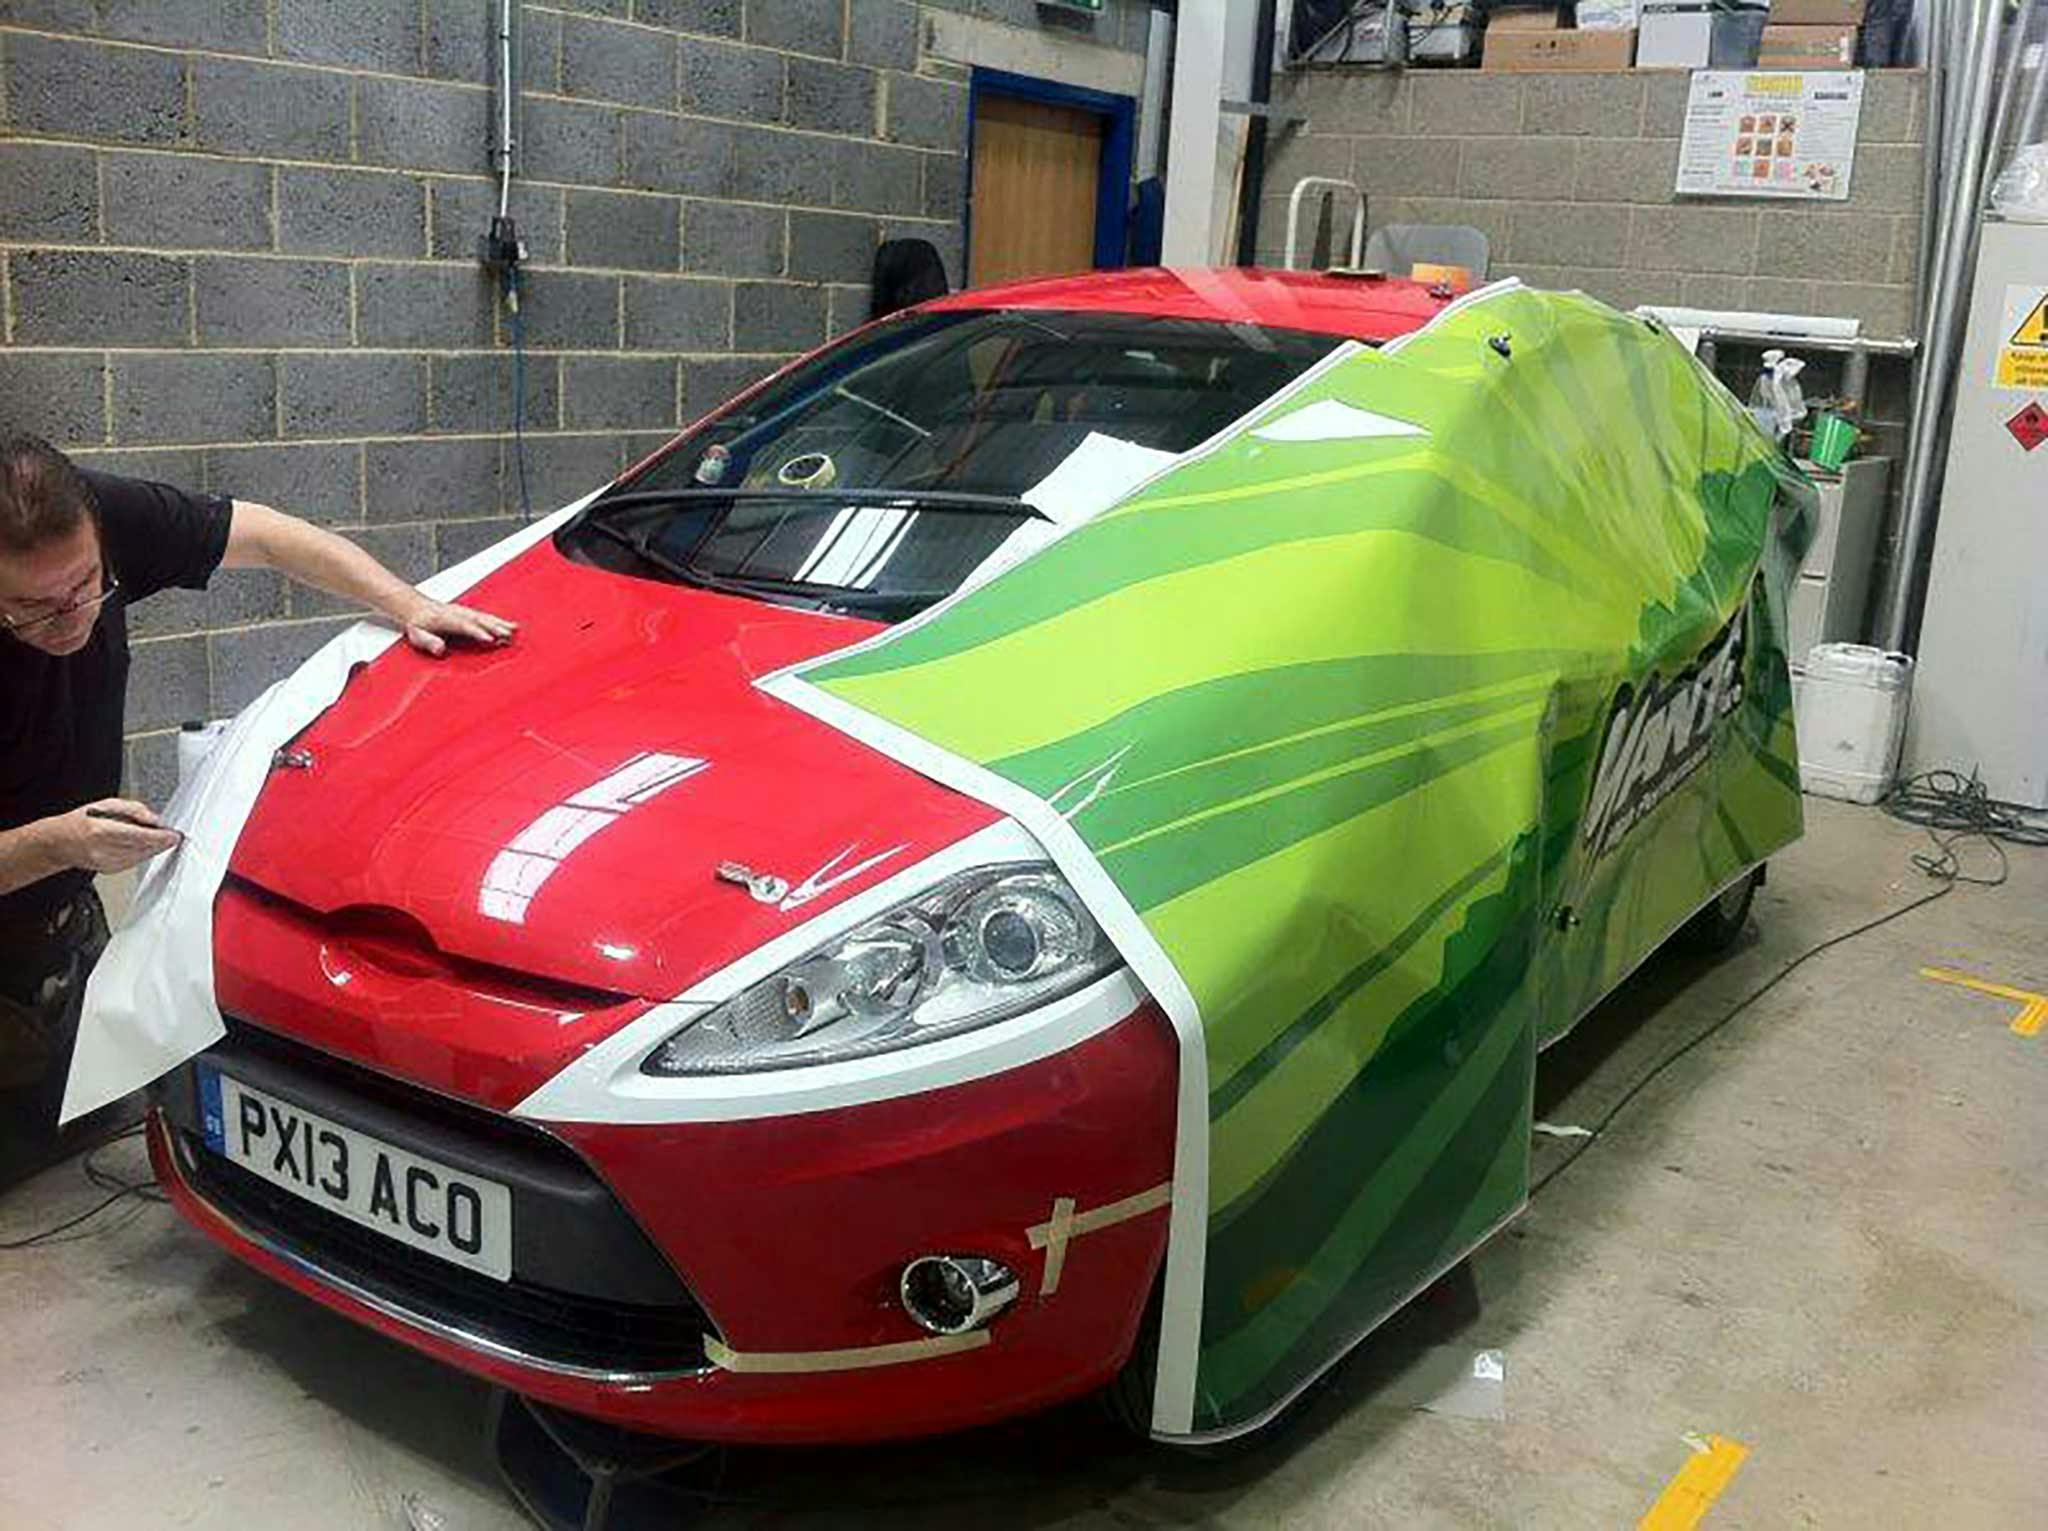 Motorsport wrapping in Leeds / West Yorkshire